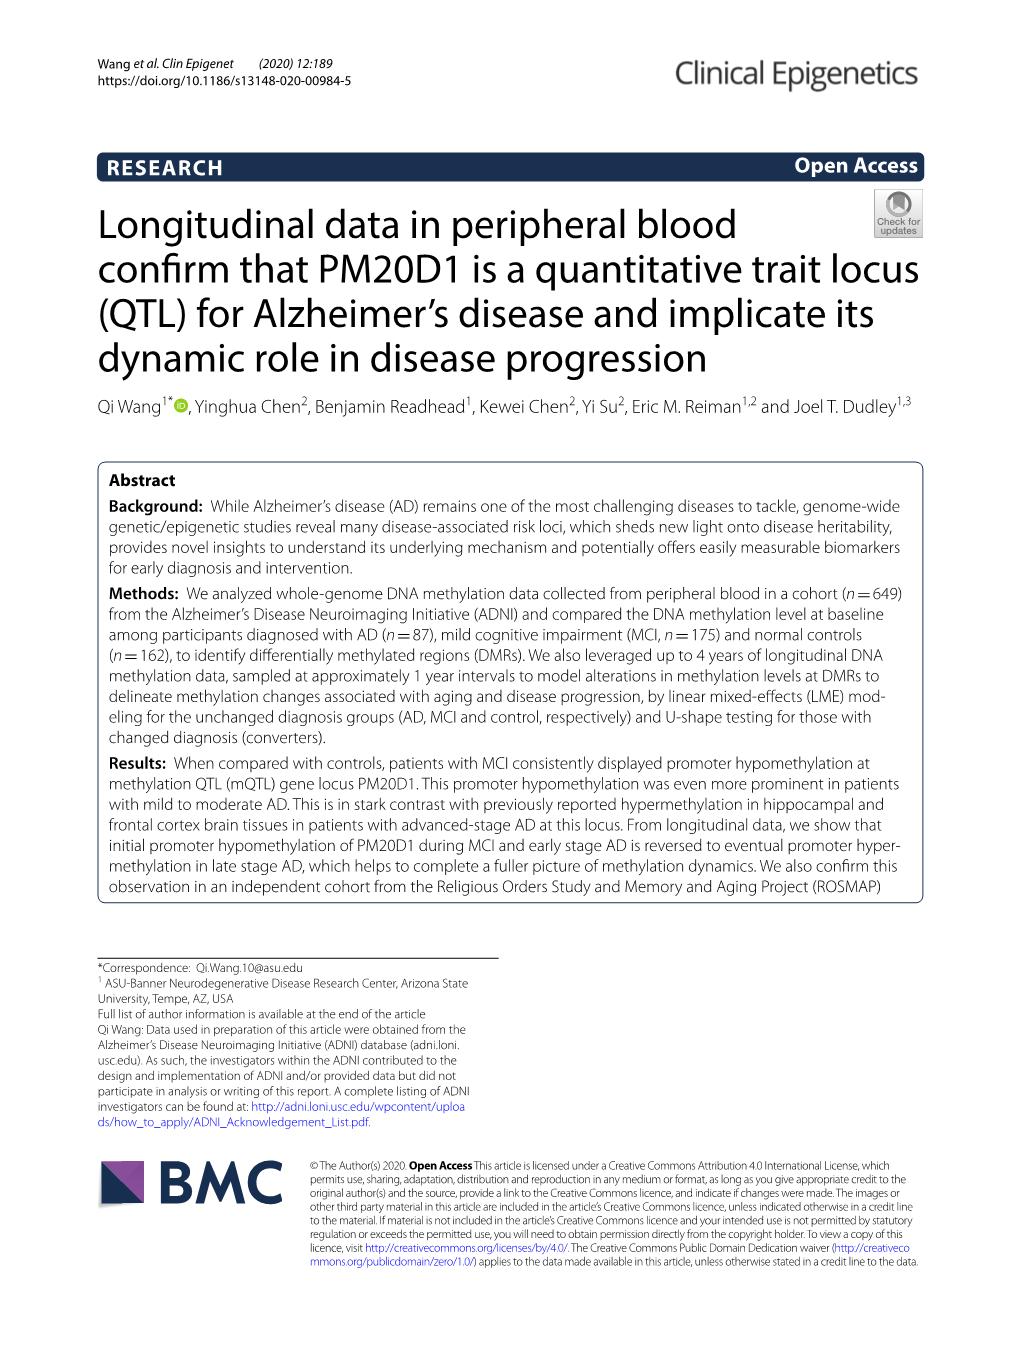 Longitudinal Data in Peripheral Blood Confirm That PM20D1 Is A